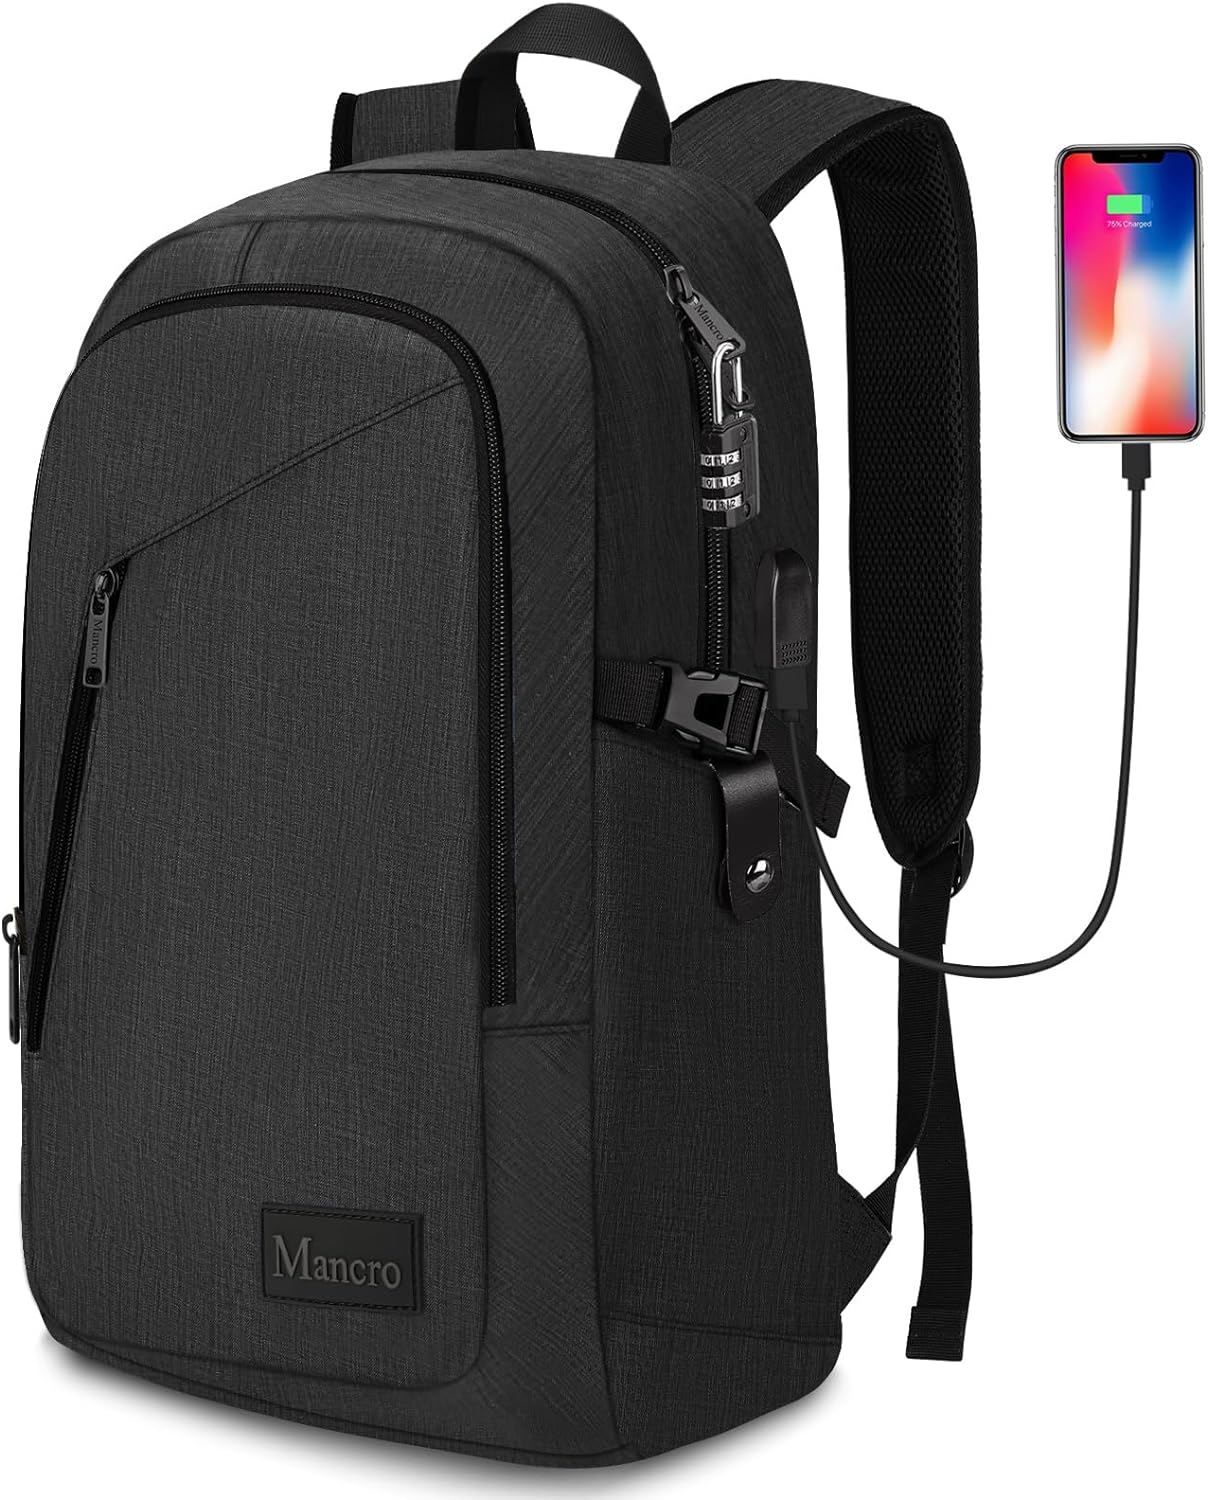 This backpack is terrific. I love it! It' the best I've had in a while. It is light weight and sturdy, not bulky. It is roomy with deep pockets. Perfect for laptop. It has great features such as anti-theft lock, outside pockets for water bottle, a phone charging port, very comfortable strap. Great buy, well worth it